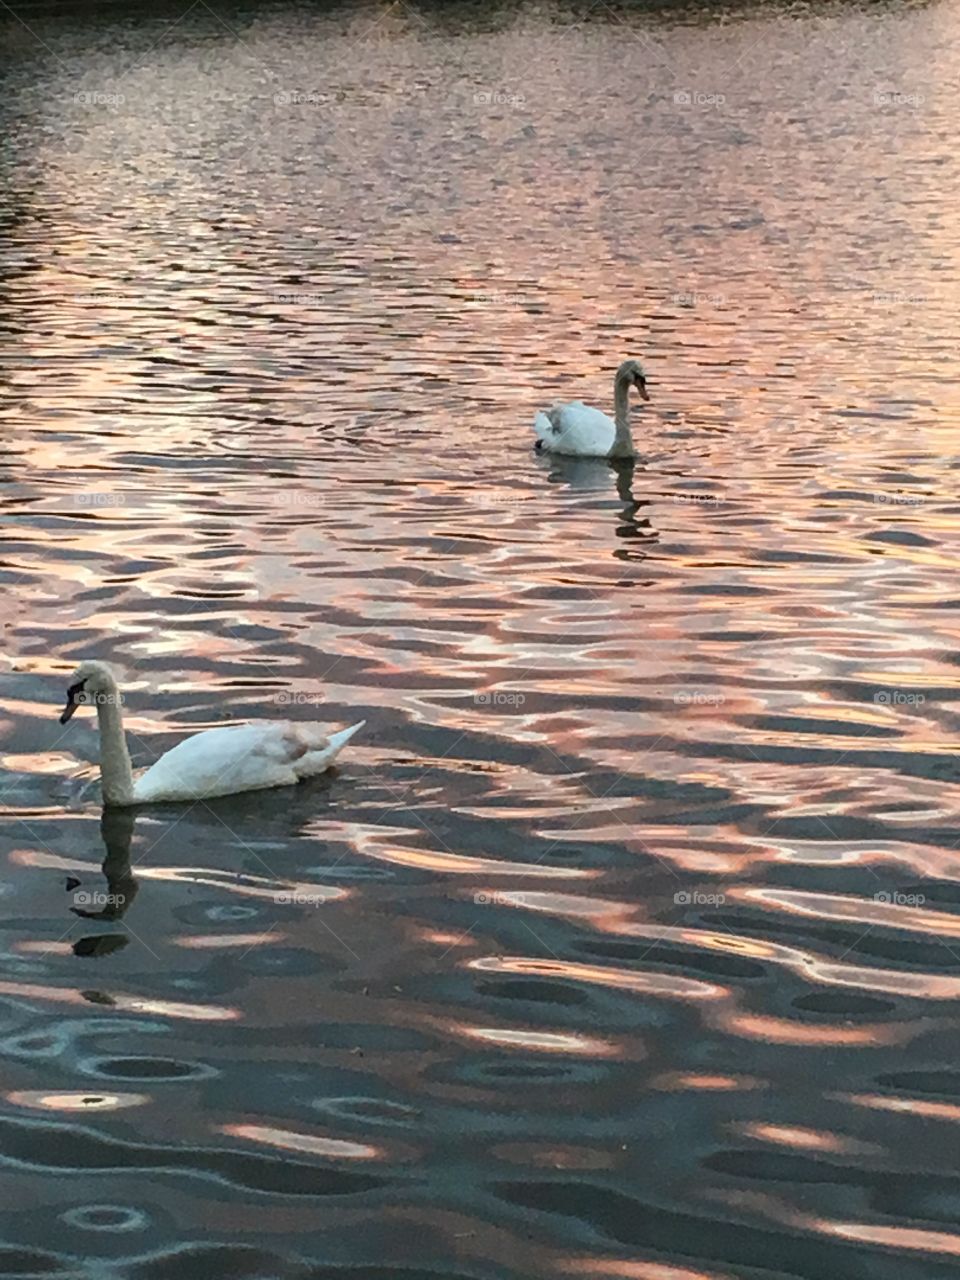 Two swans swimming on Brayford Pool in Lincoln, England at sunset